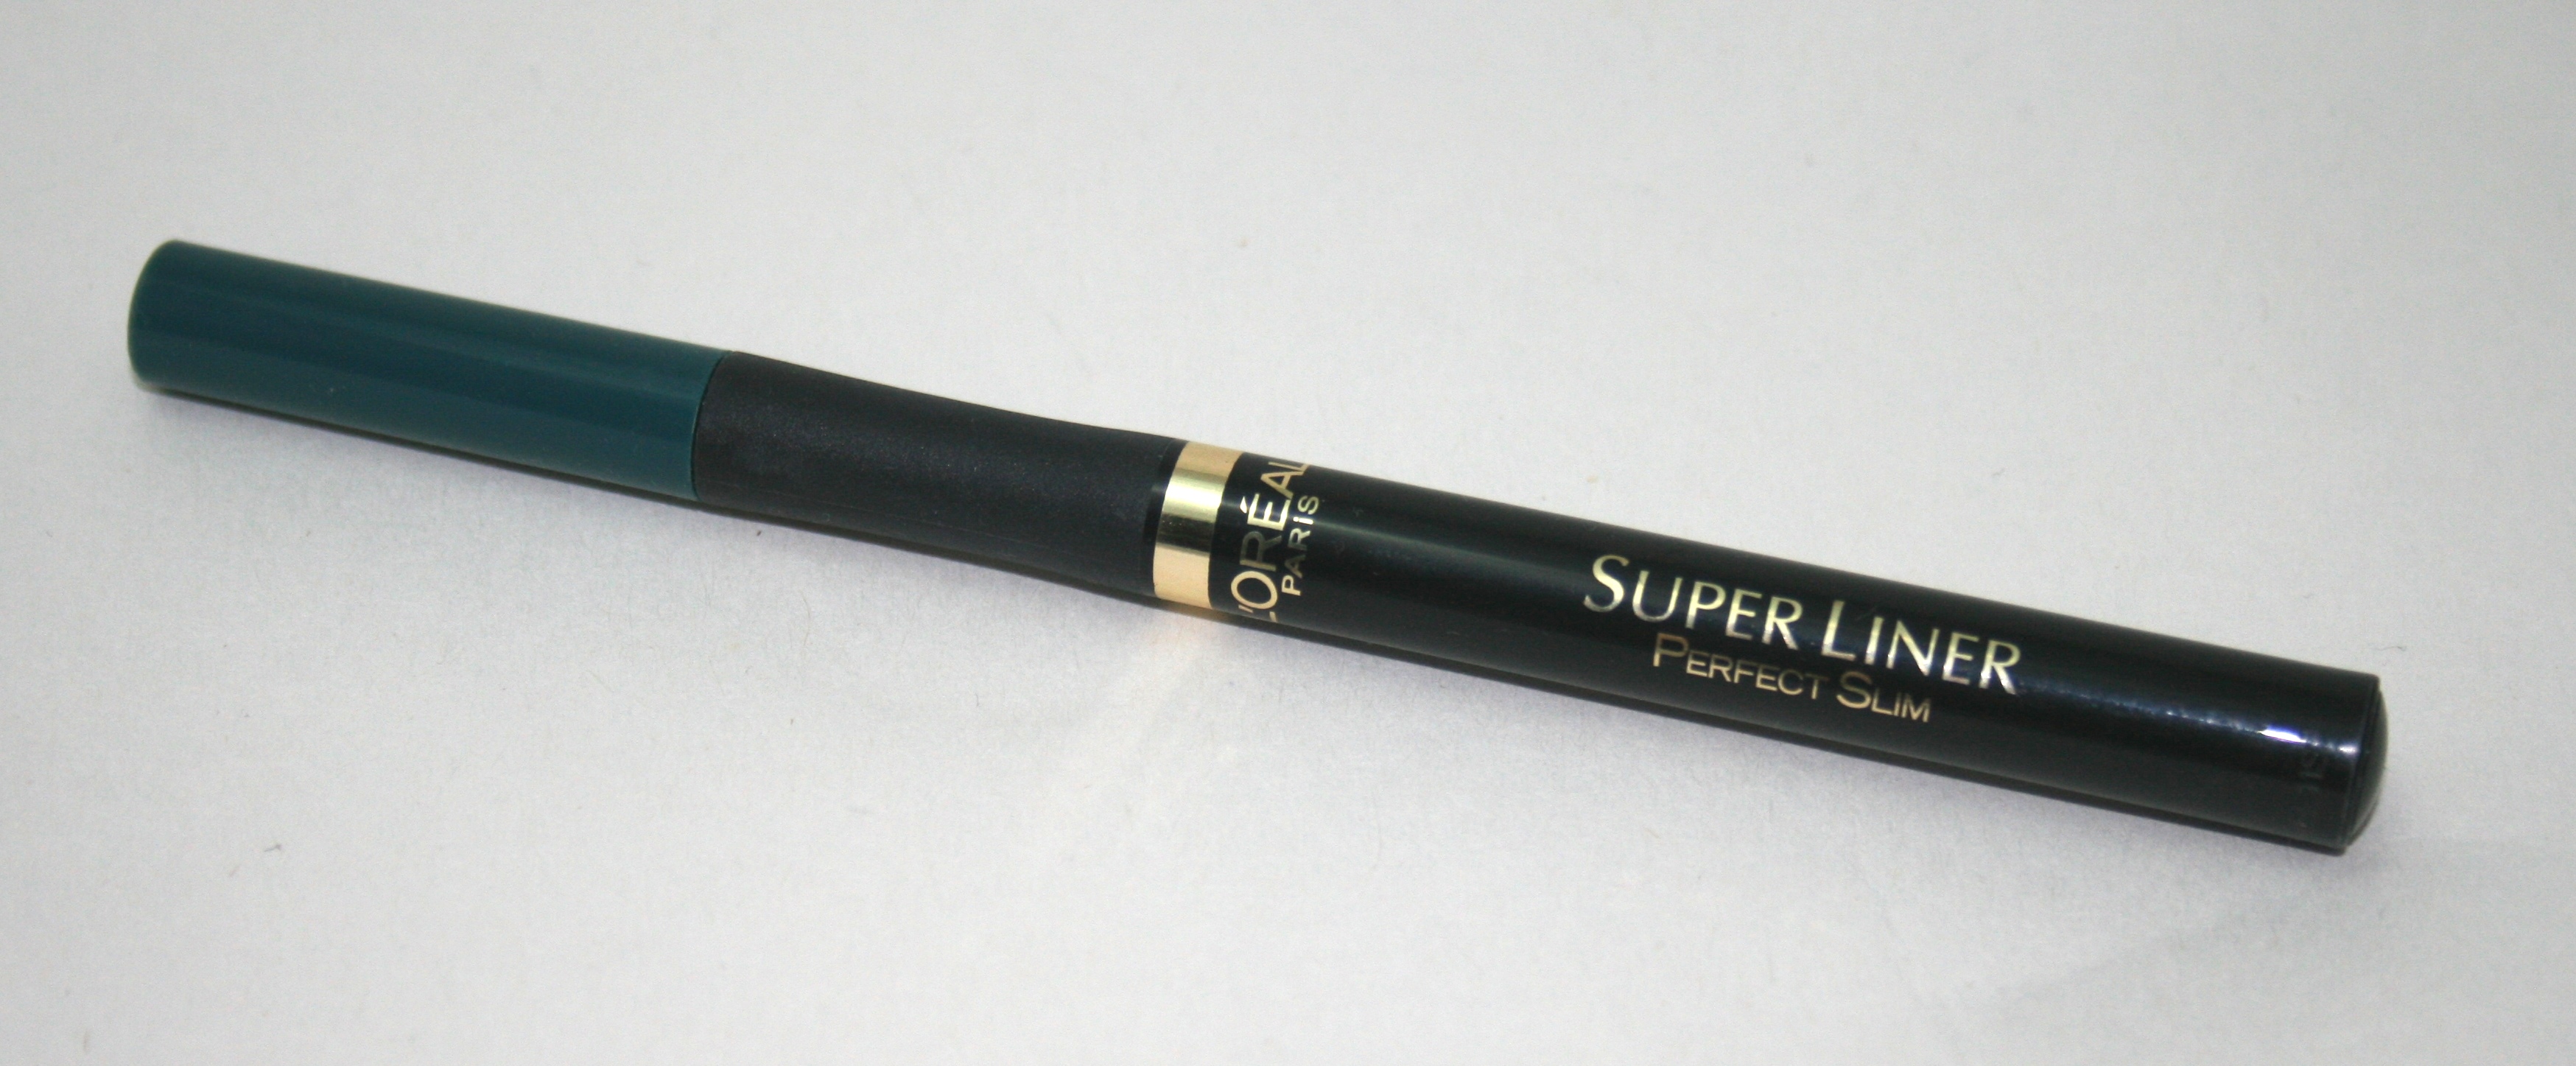 L’Oreal Superliner Perfect Slim in Green